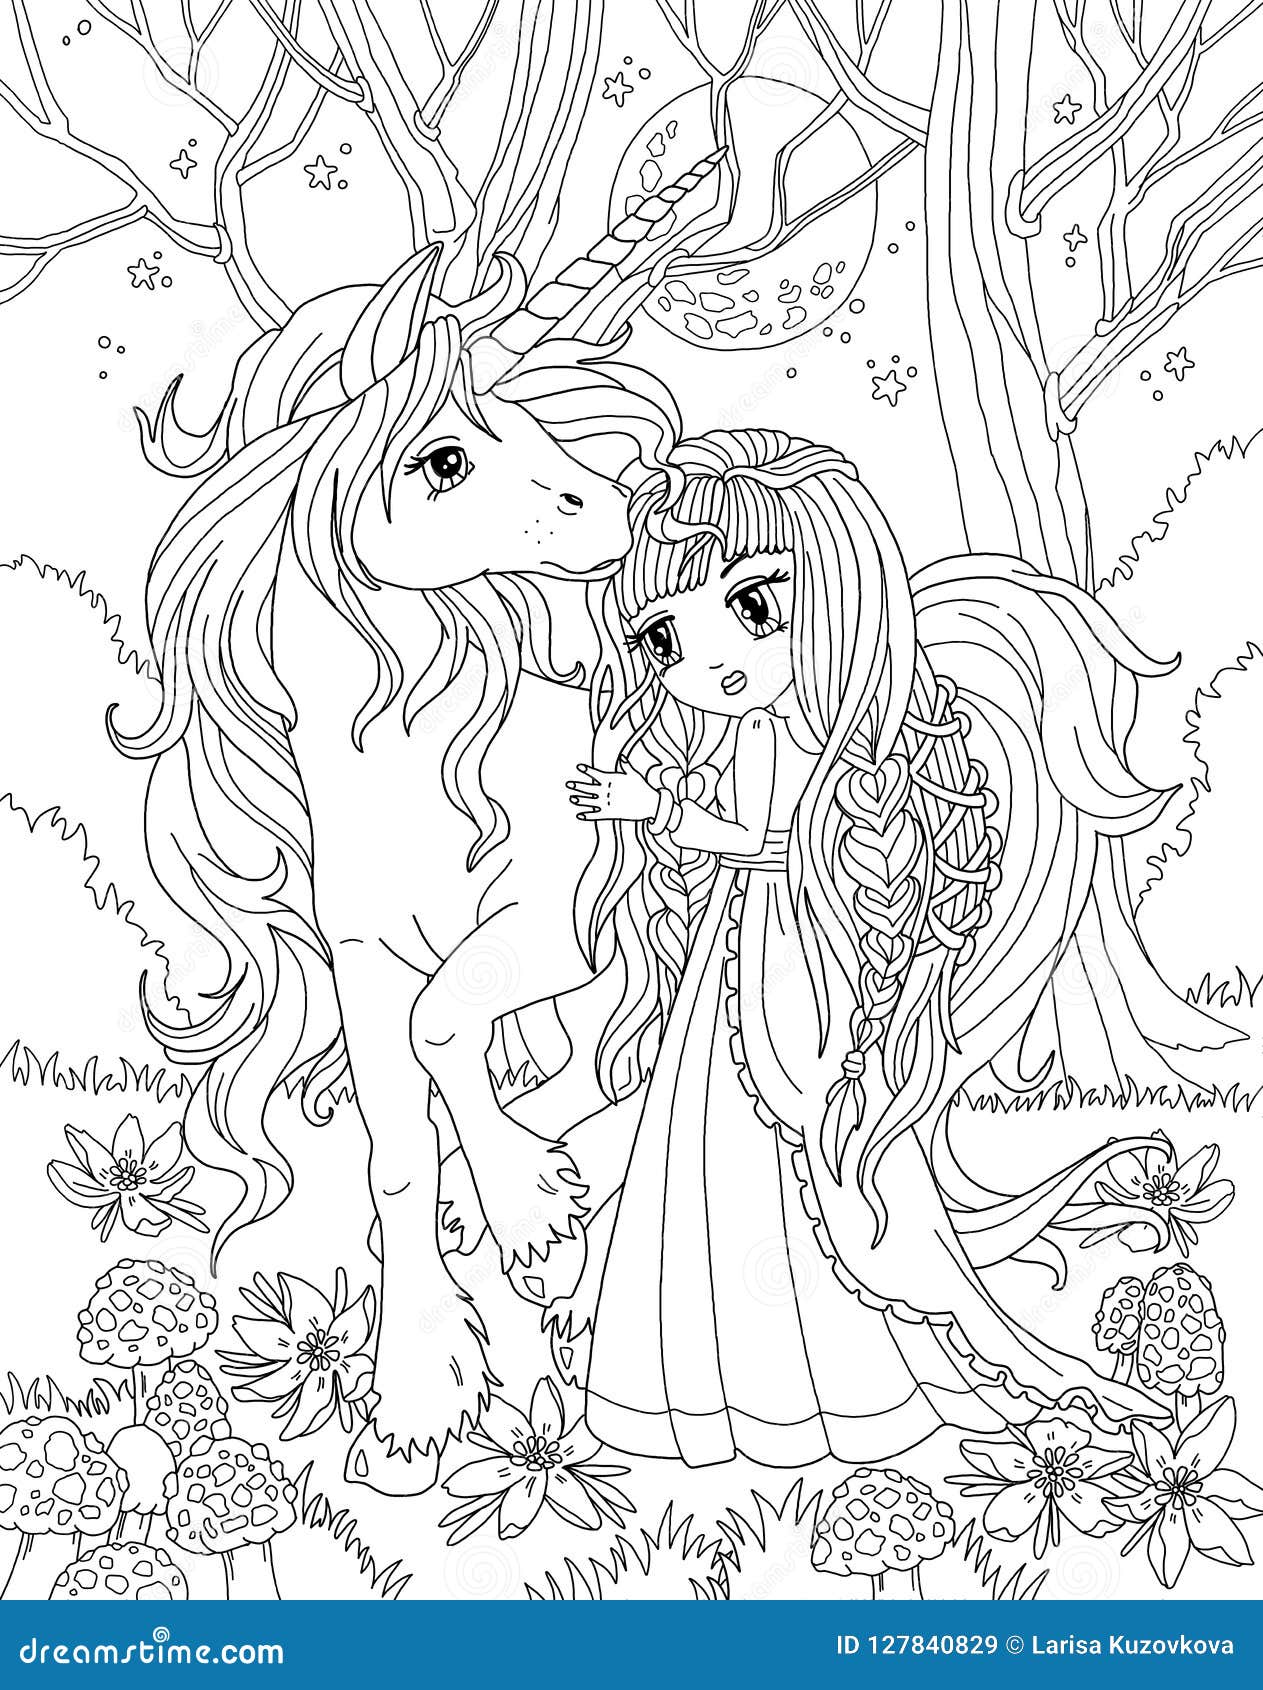 Coloring Page The Unicorn And Princess Stock Illustration